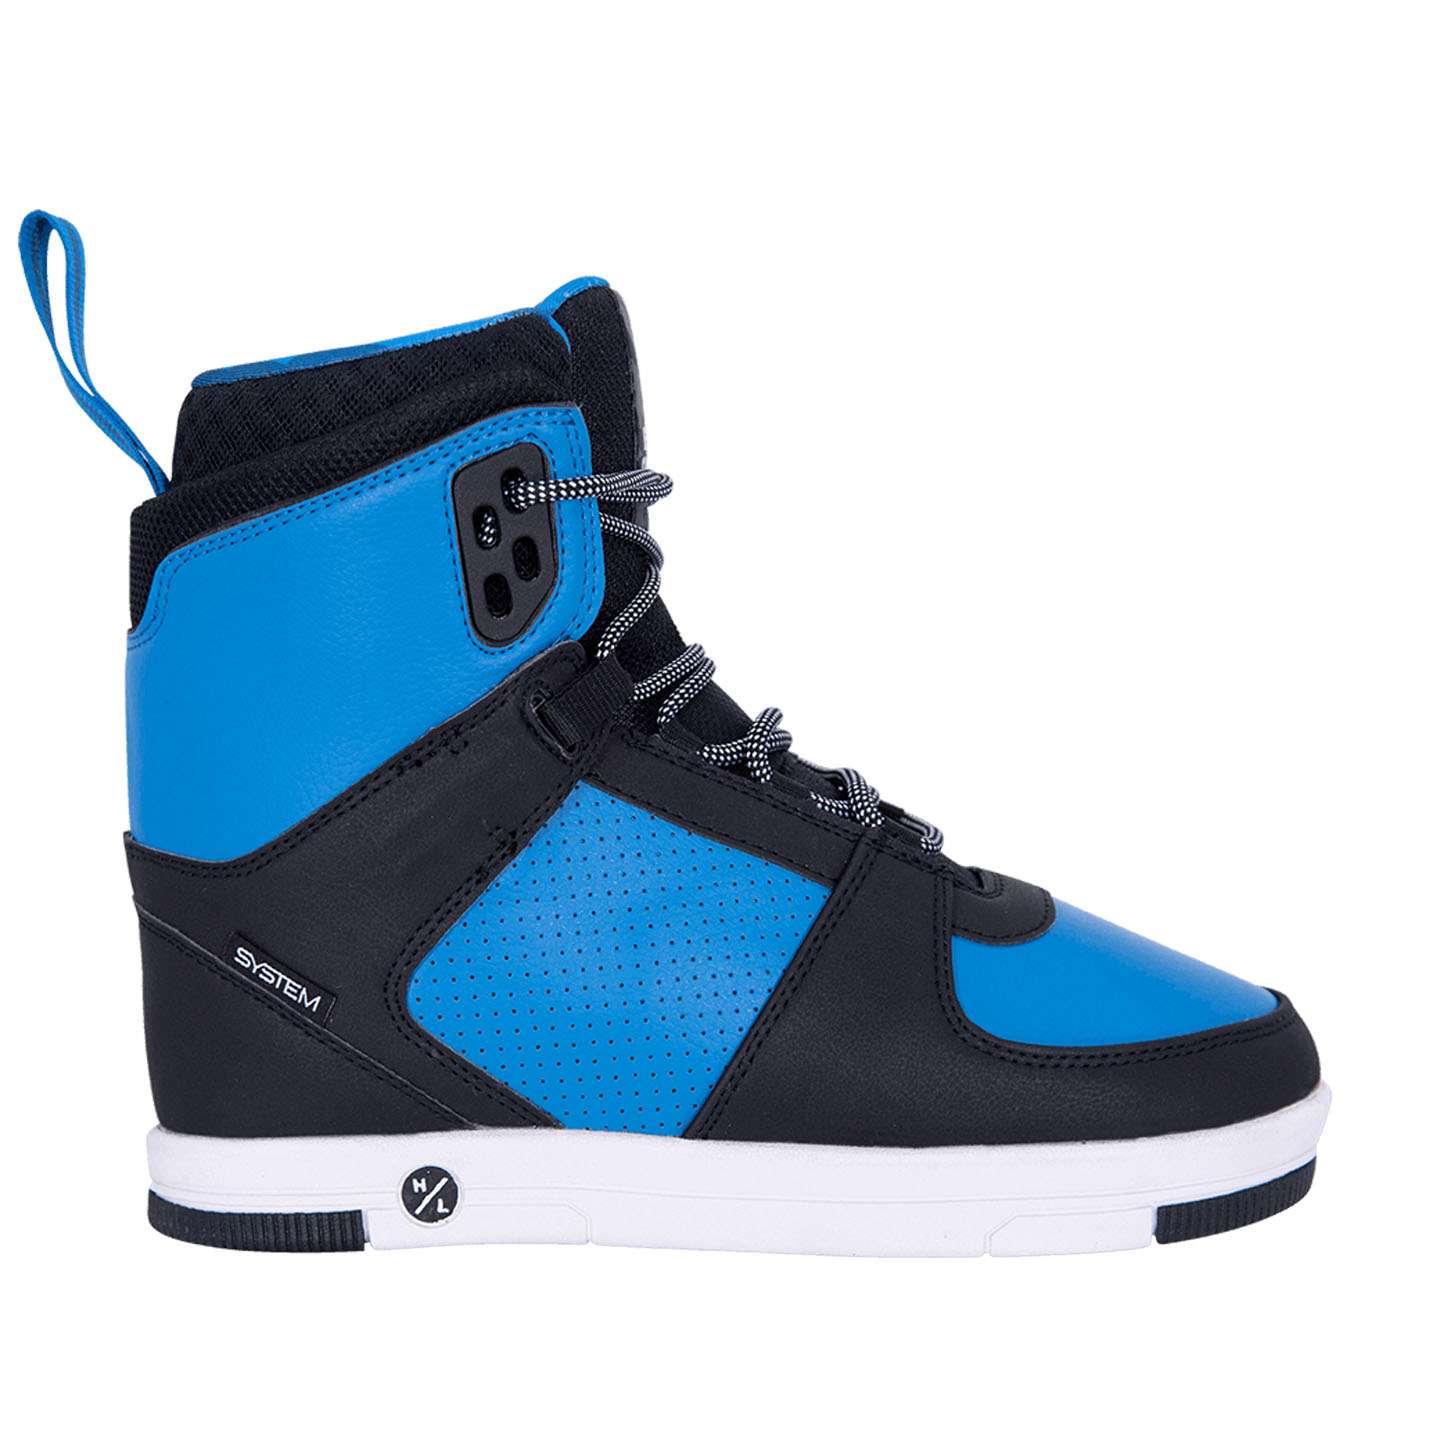 Hyperlite Relapse 2021 Wakeboard Boots | King of Watersports